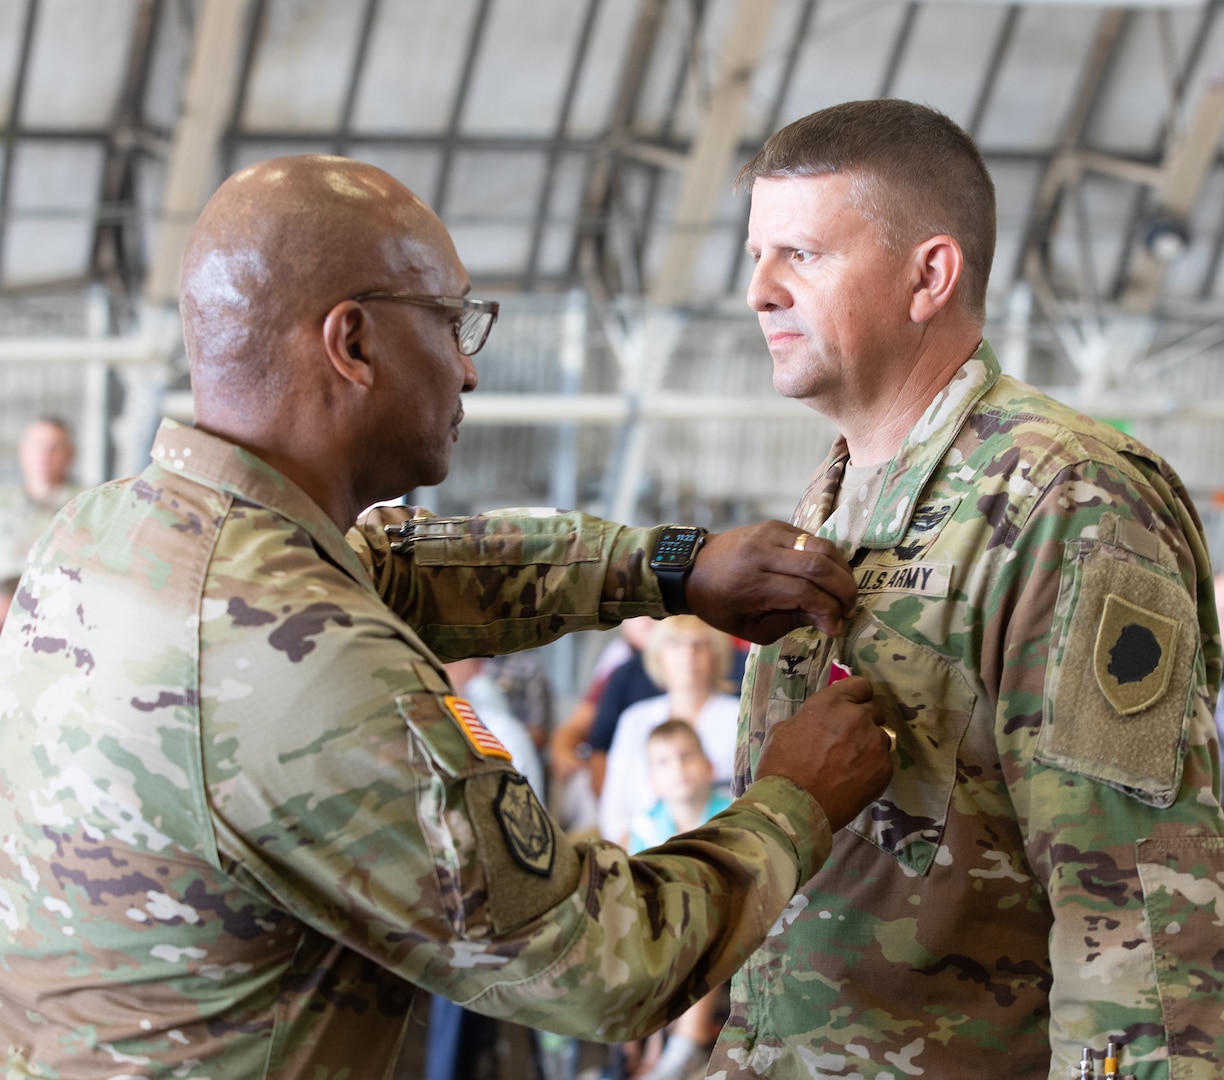 Maj. Gen. Rodney Boyd, Assistant Adjutant General - Army and Commander of the Illinois Army National Guard, presents Col. Jason Osberg with the Legion of Merit during the change of command ceremony on Aug. 27, 2023 at the Army Aviation Support Facility in Peoria, Illinois.